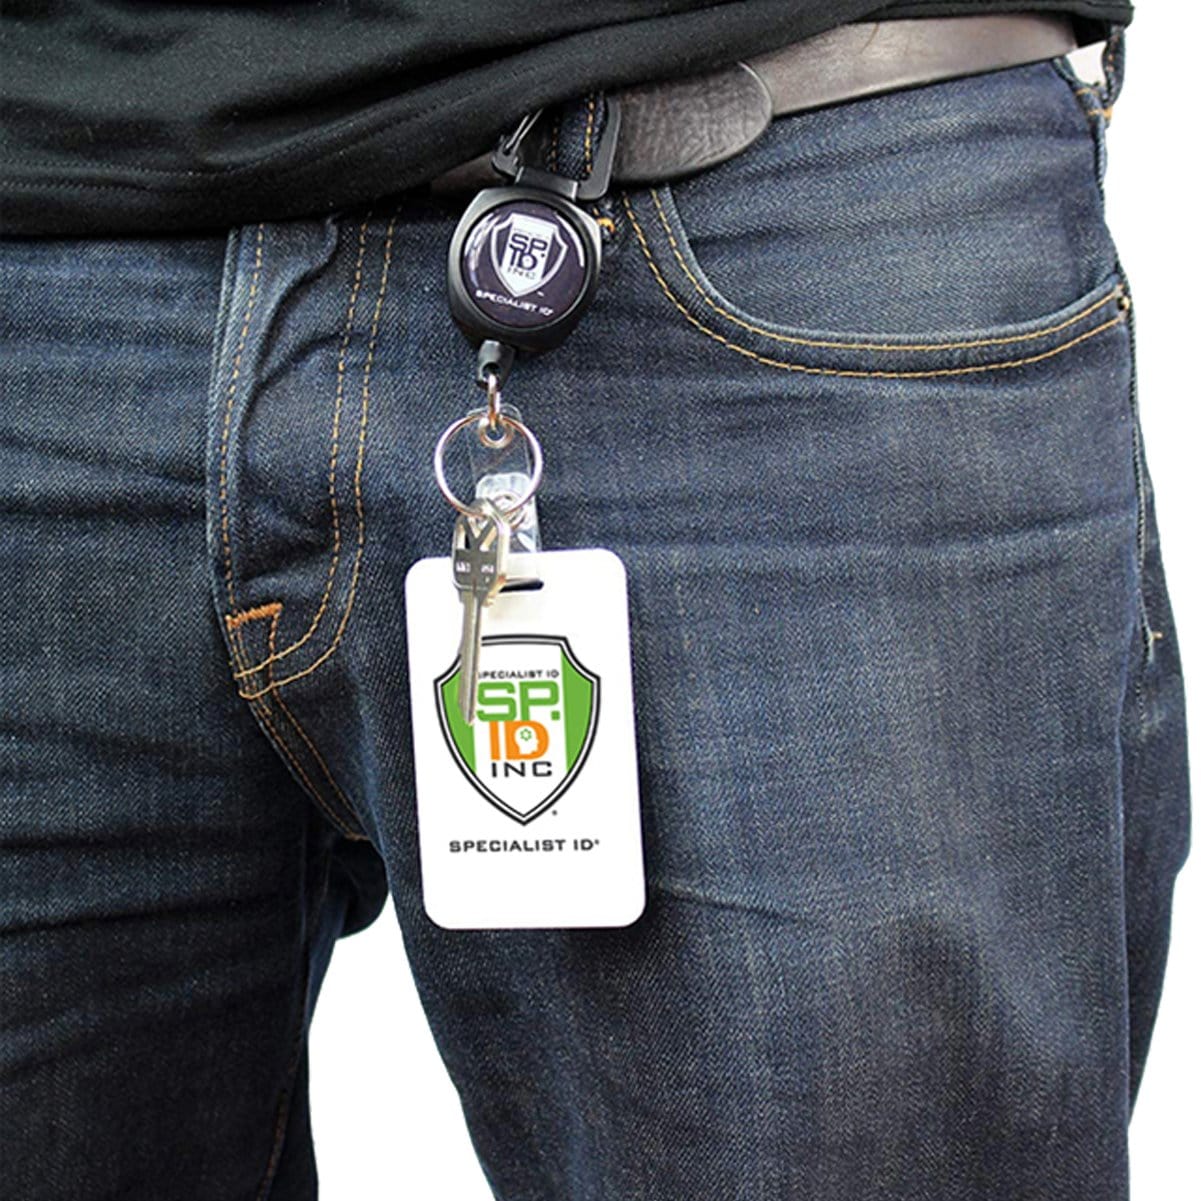 A person wearing jeans with a belt has an ID badge reel clipped to their waistband, displaying a "Specialist ID Inc." badge with a green and yellow shield logo. The SPID Key-Bak SIDEKICK Heavy Duty Retractable Carabiner Badge Reel with ID Holder Strap & Keychain, paired with a Kevlar retractable cord, ensures durability and security.